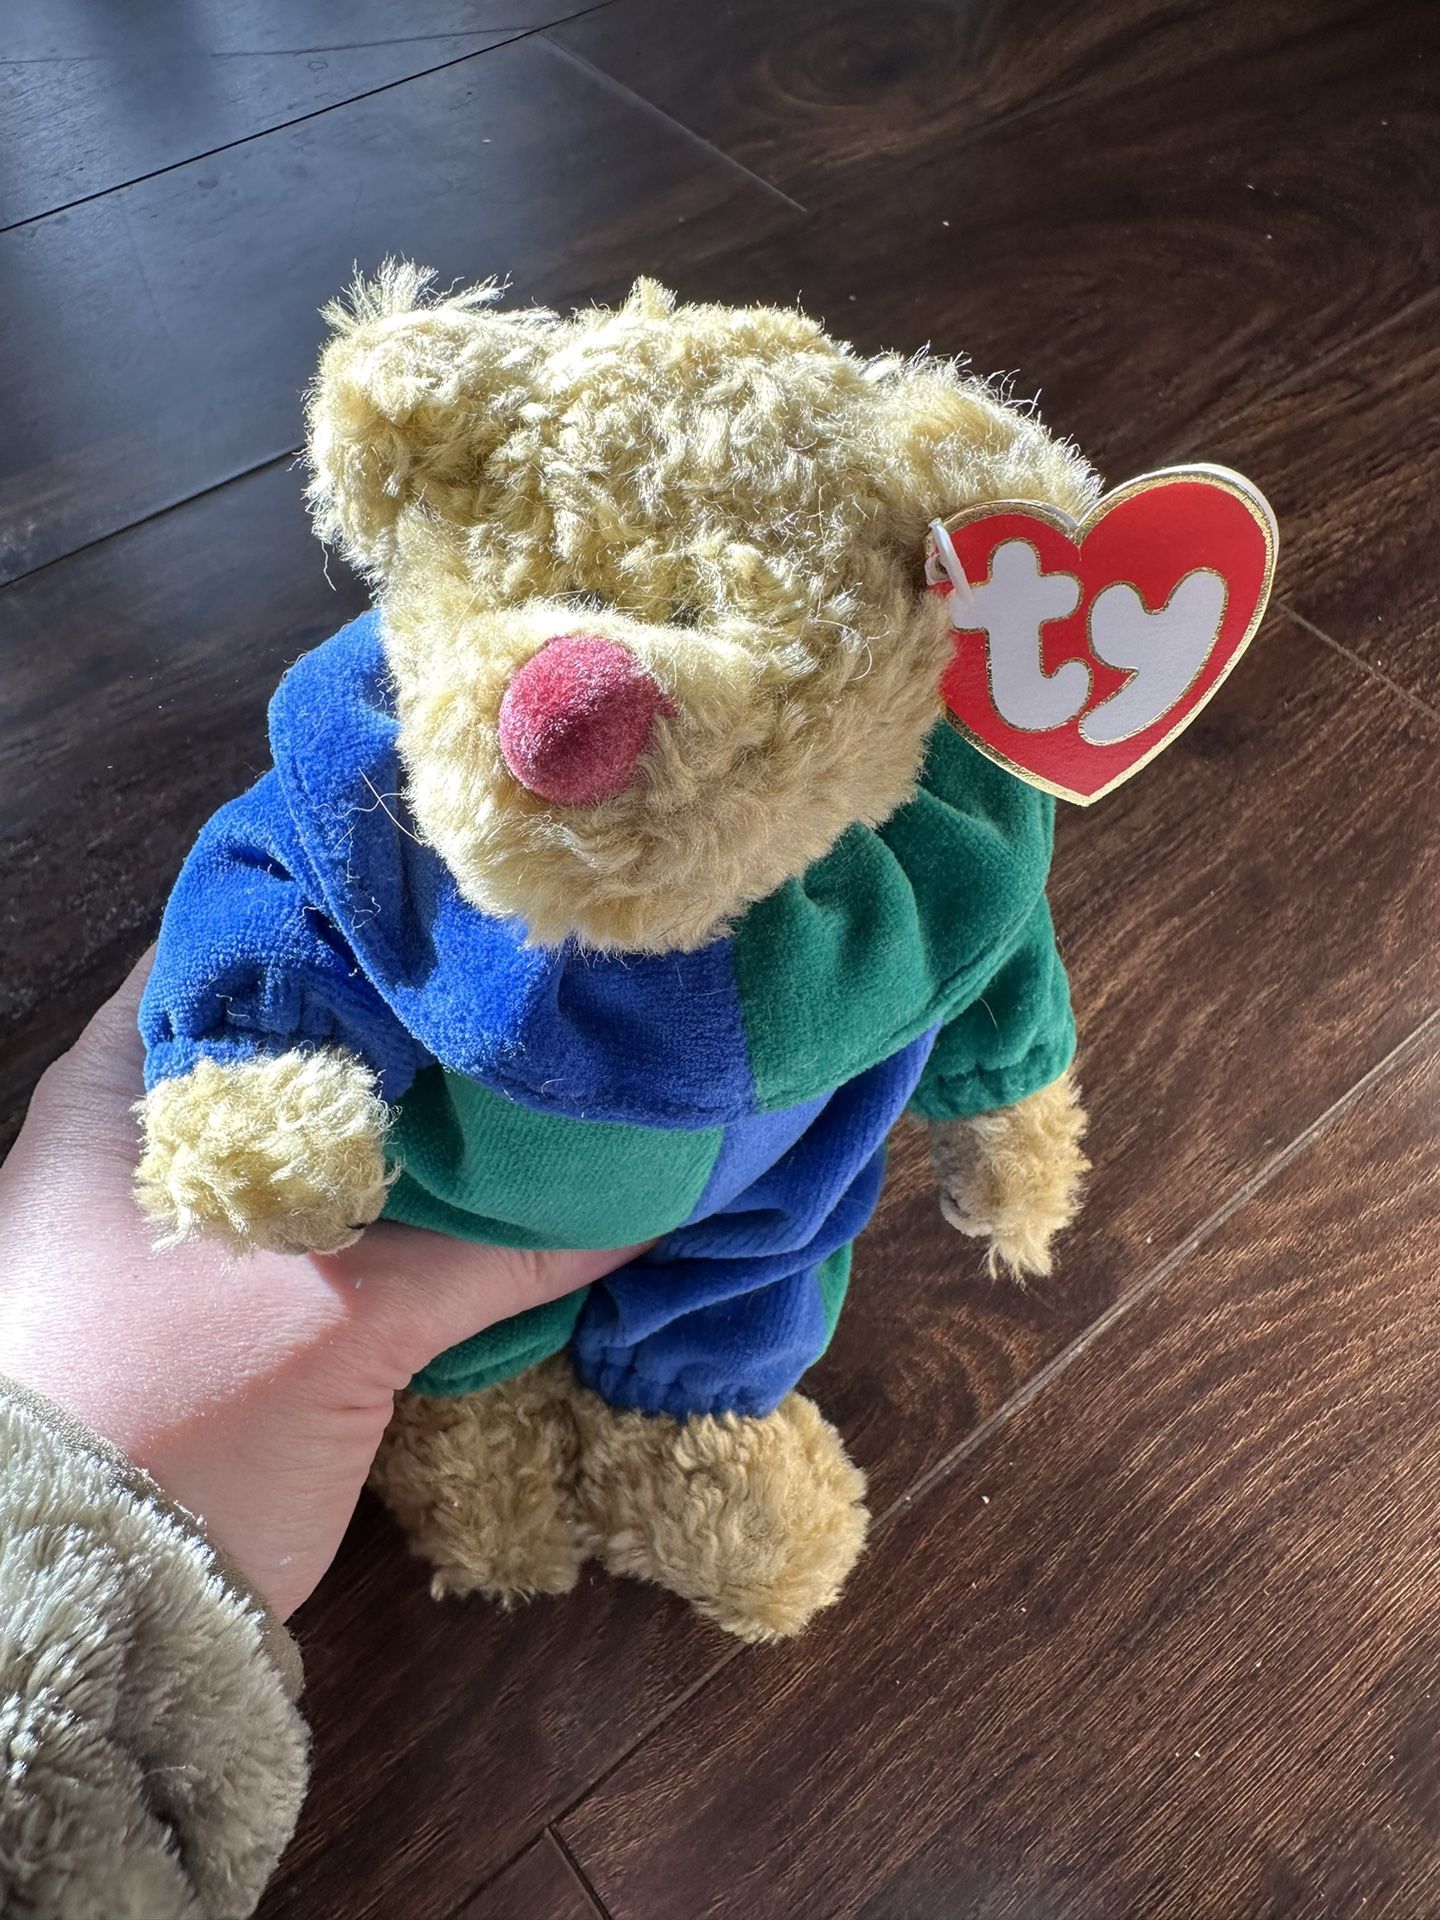 7 Beanie Babies Incl Picadilly 3rd Edition